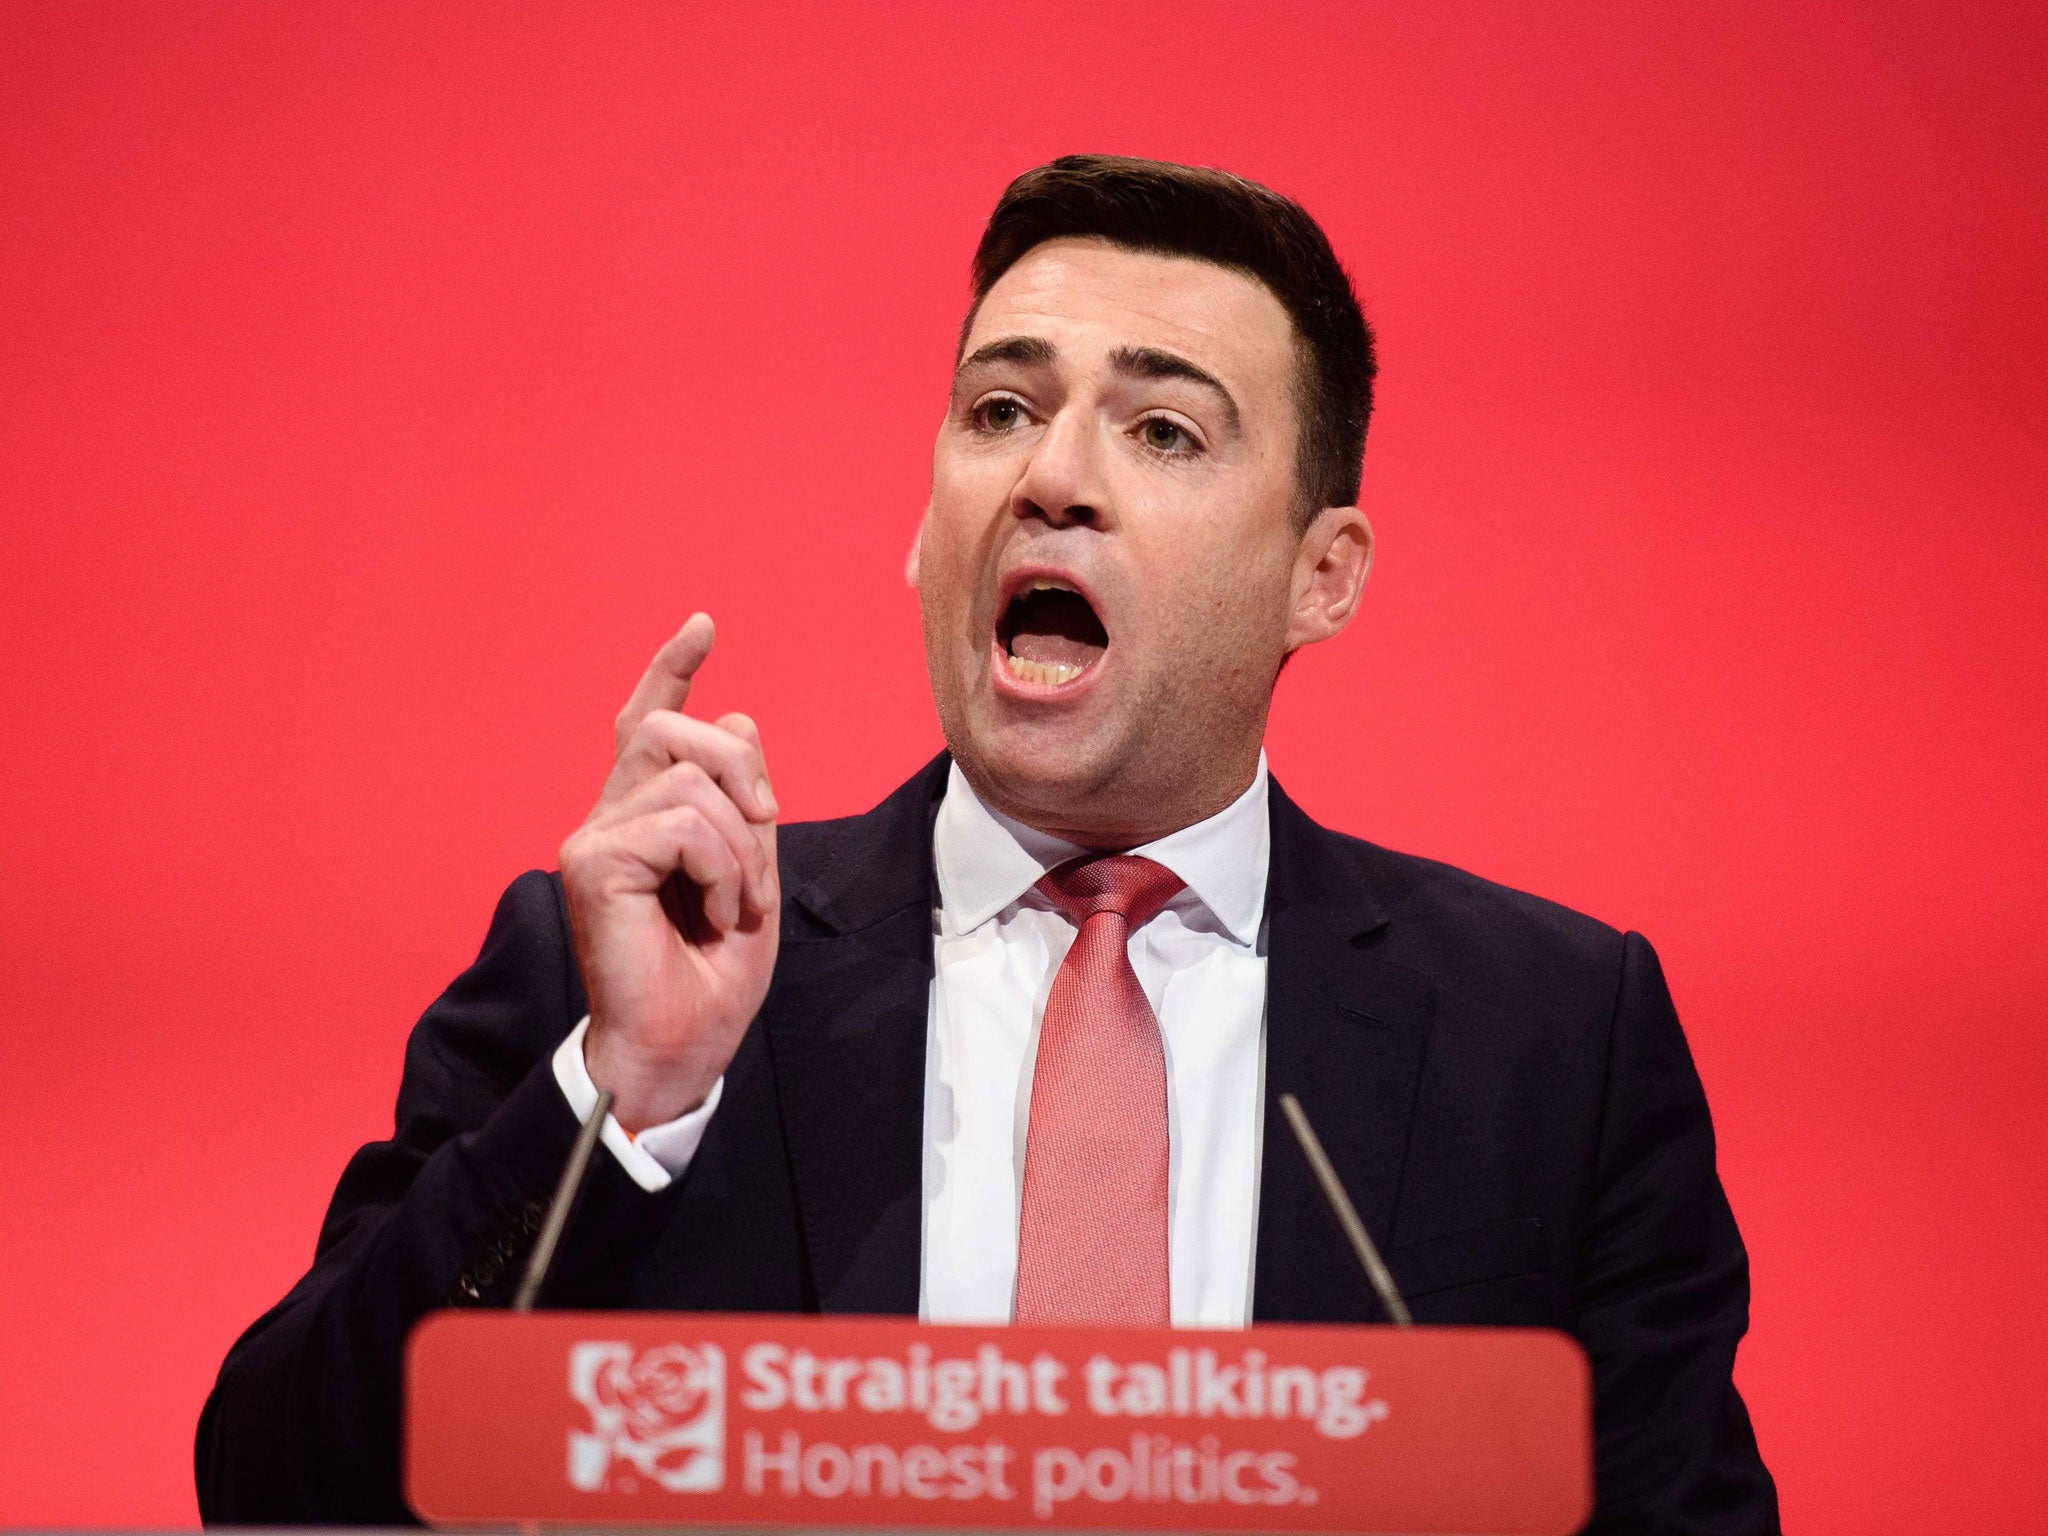 Andy Burnham said the government was 'giving with one hand but taking away with the other'